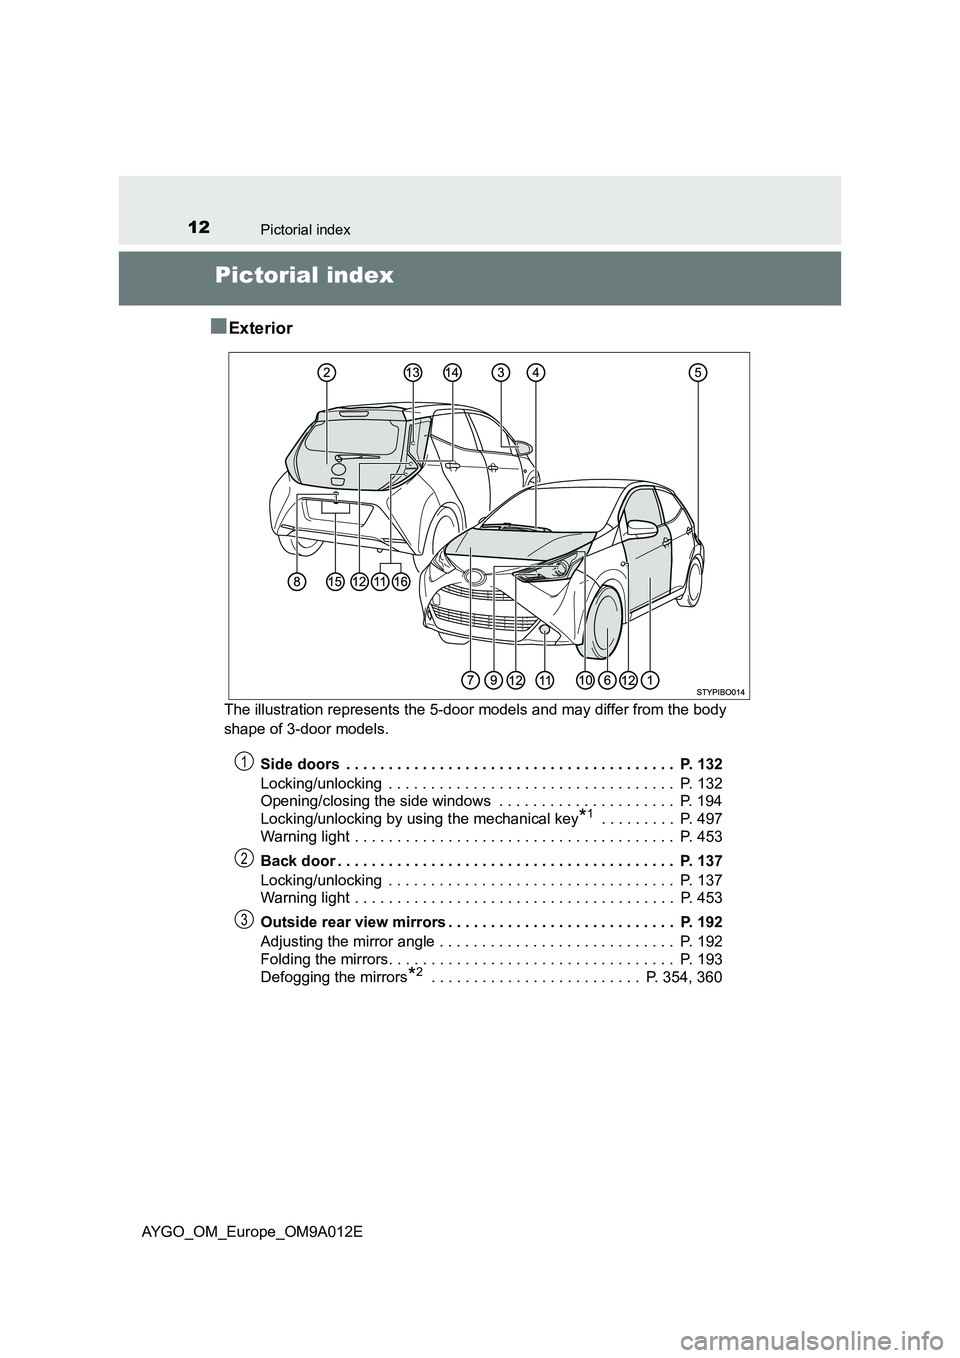 TOYOTA AYGO 2021  Owners Manual 12Pictorial index
AYGO_OM_Europe_OM9A012E
Pictorial index
■
Exterior
The illustration represents the 5-door models and may differ from the body 
shape of 3-door models.
Side doors  . . . . . . . . .